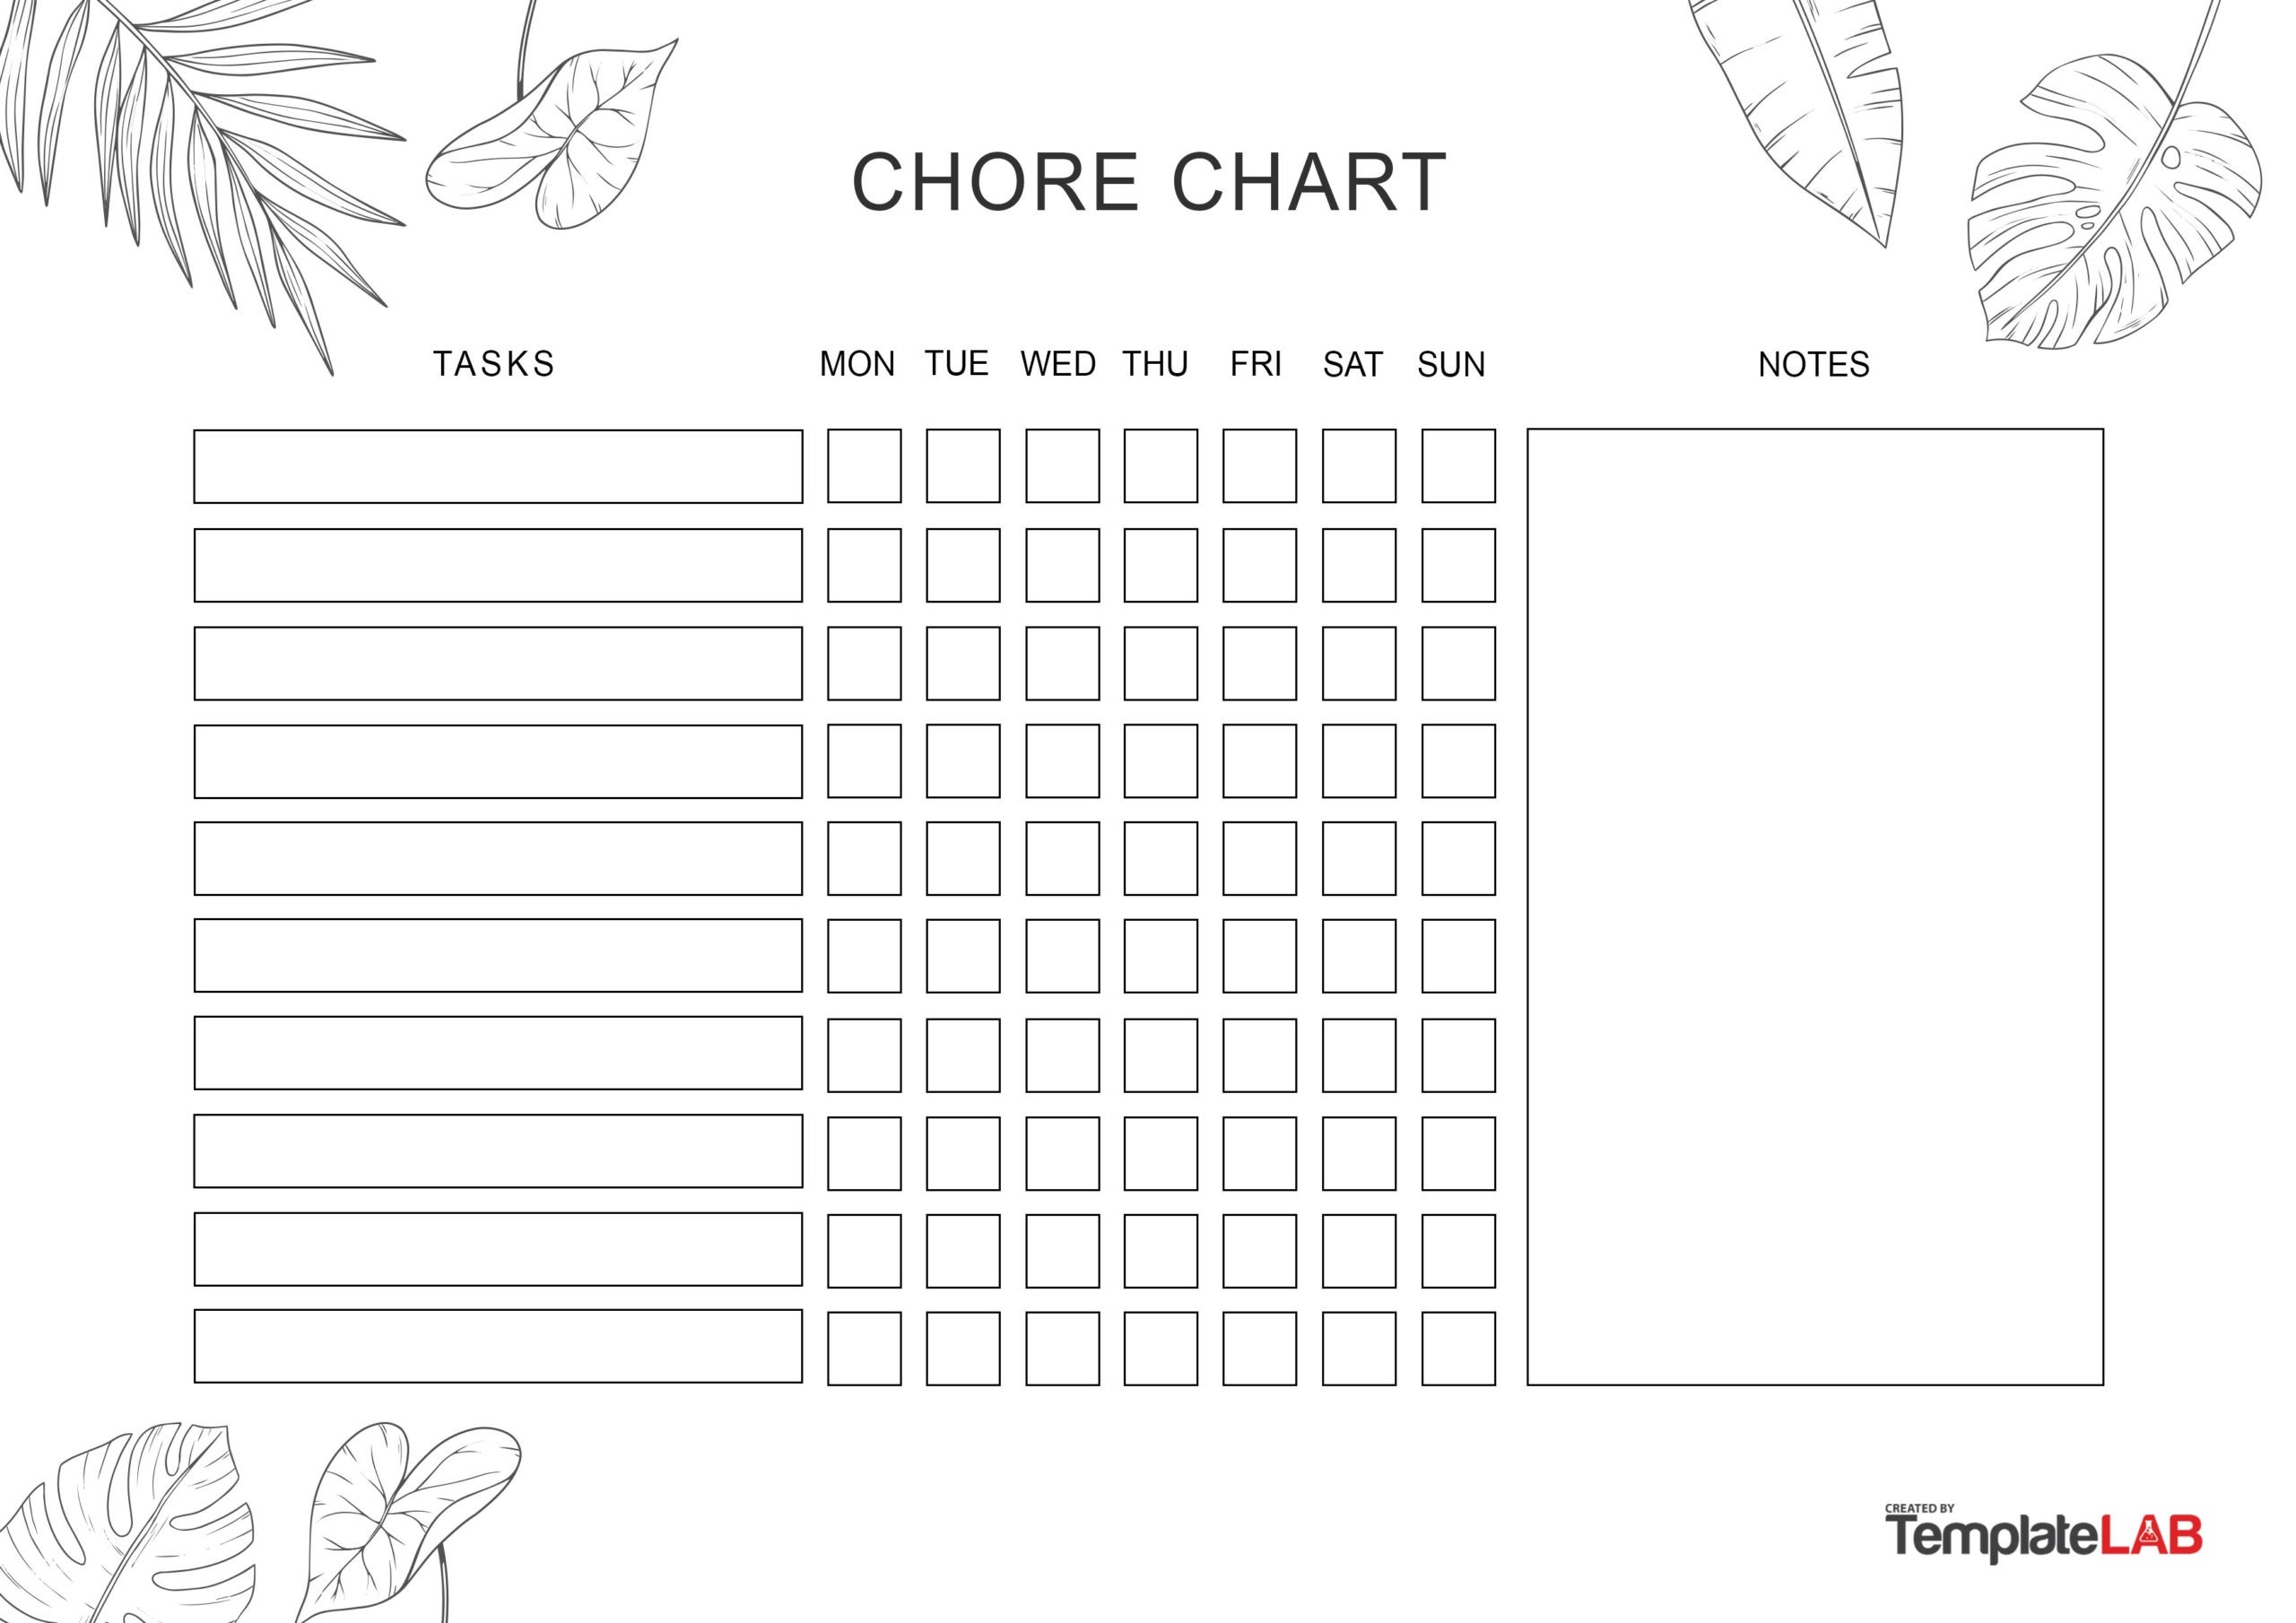 23 FREE Chore Chart Templates For Kids TemplateLab - Free Printable Chore Chart Templates